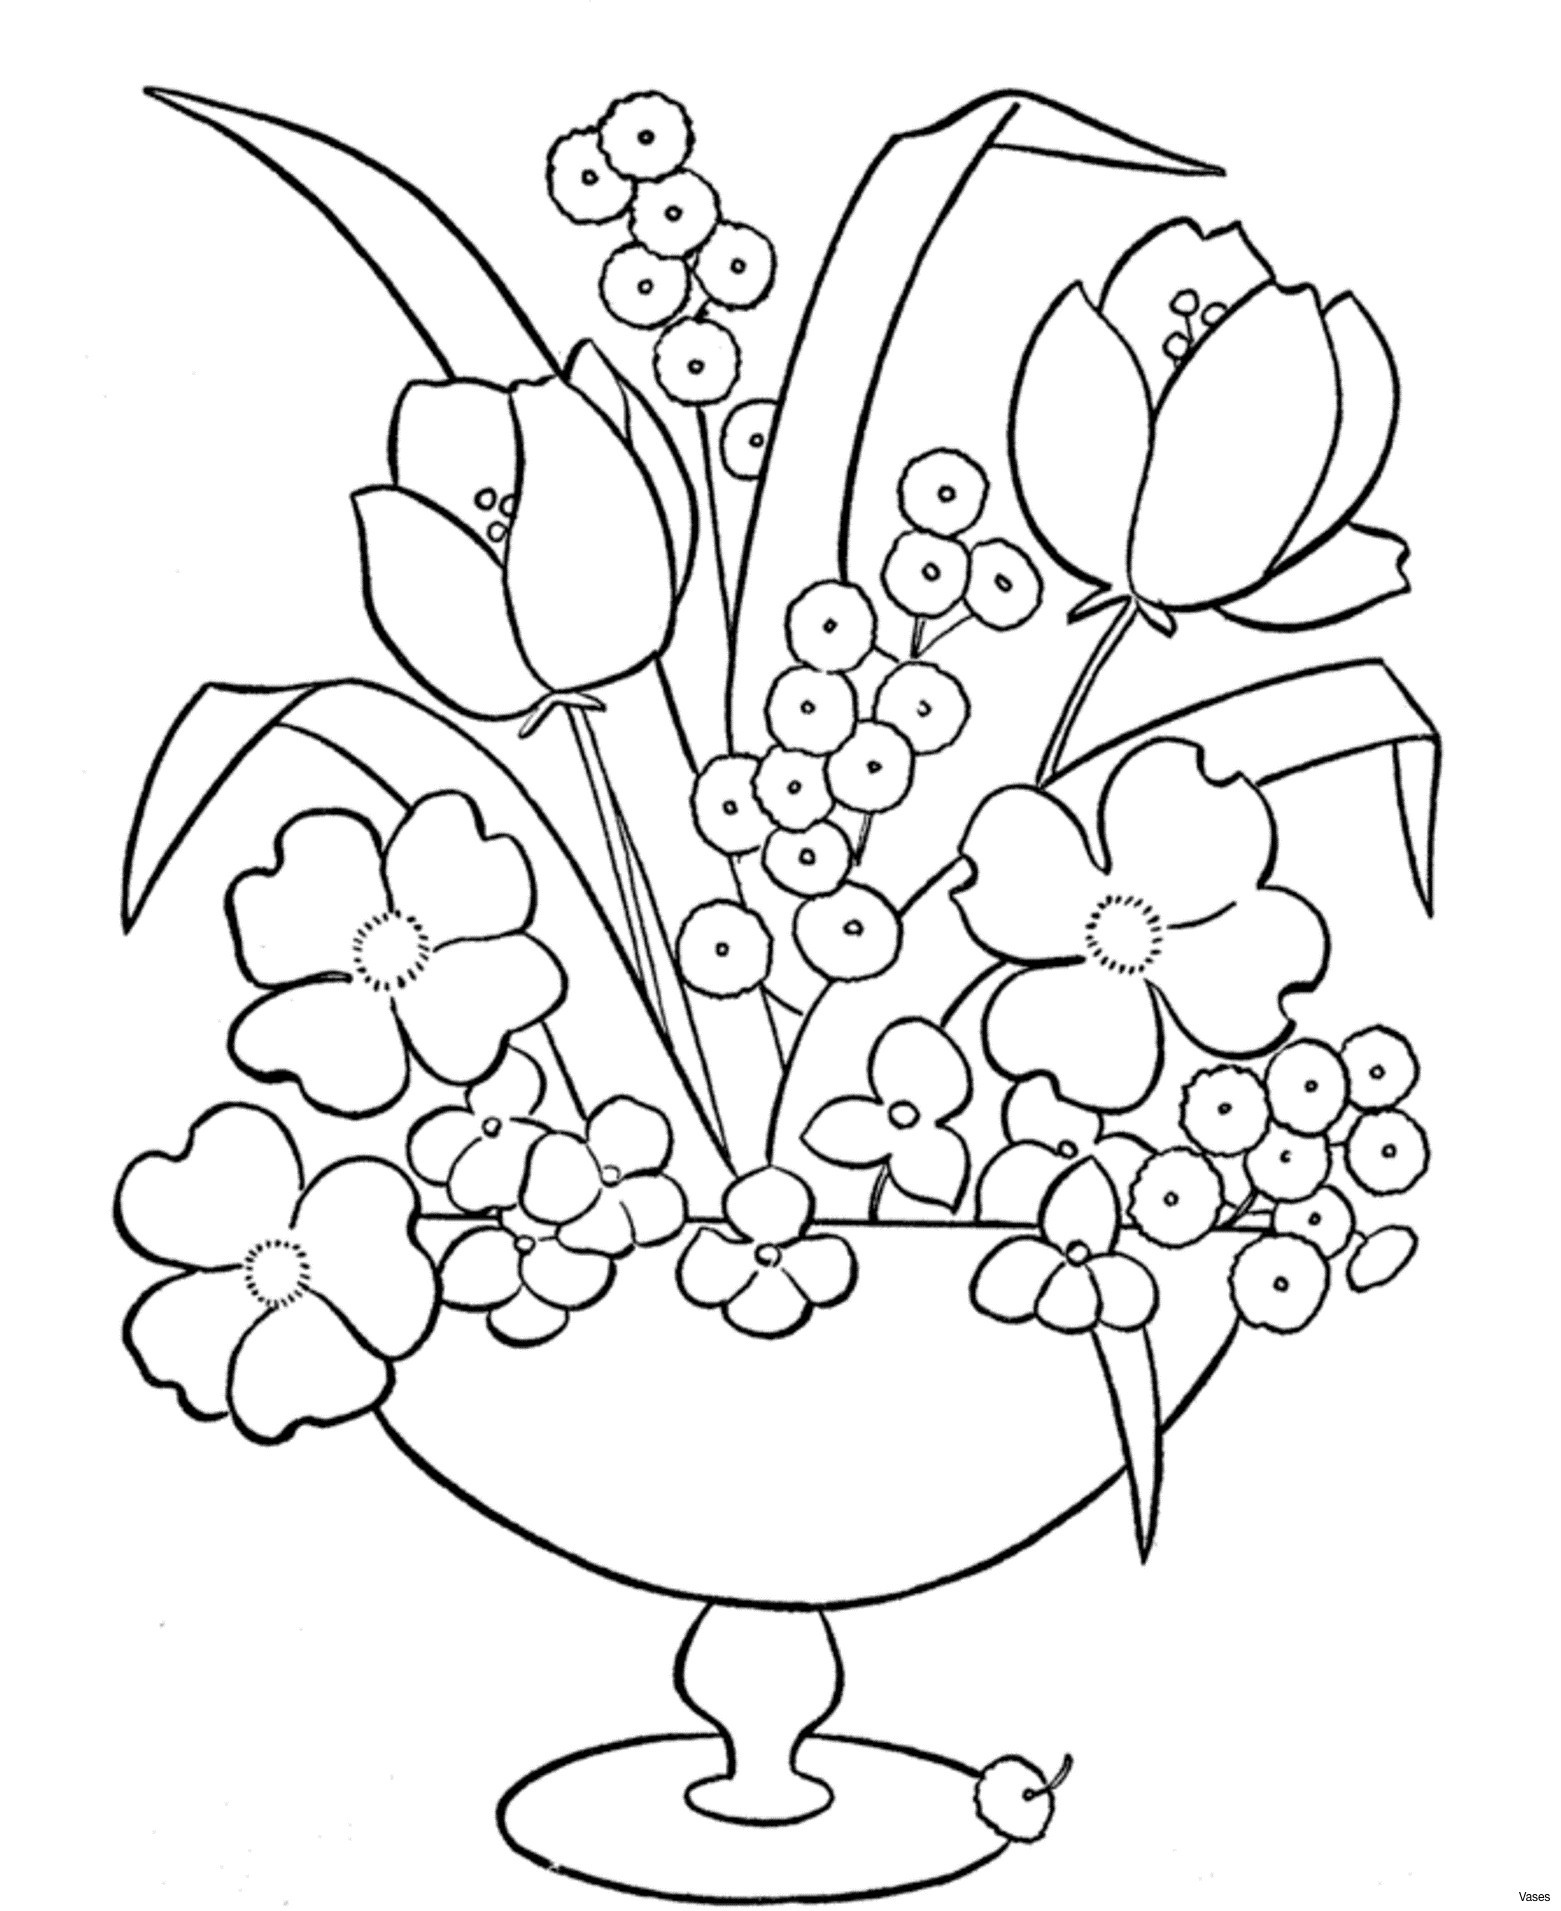 29 Stunning Navy Blue Flower Vases 2024 free download navy blue flower vases of skateboard coloring sheets cool vases flower vase coloring page with skateboard coloring sheets cool vases flower vase coloring page pages flowers in a top i 0d